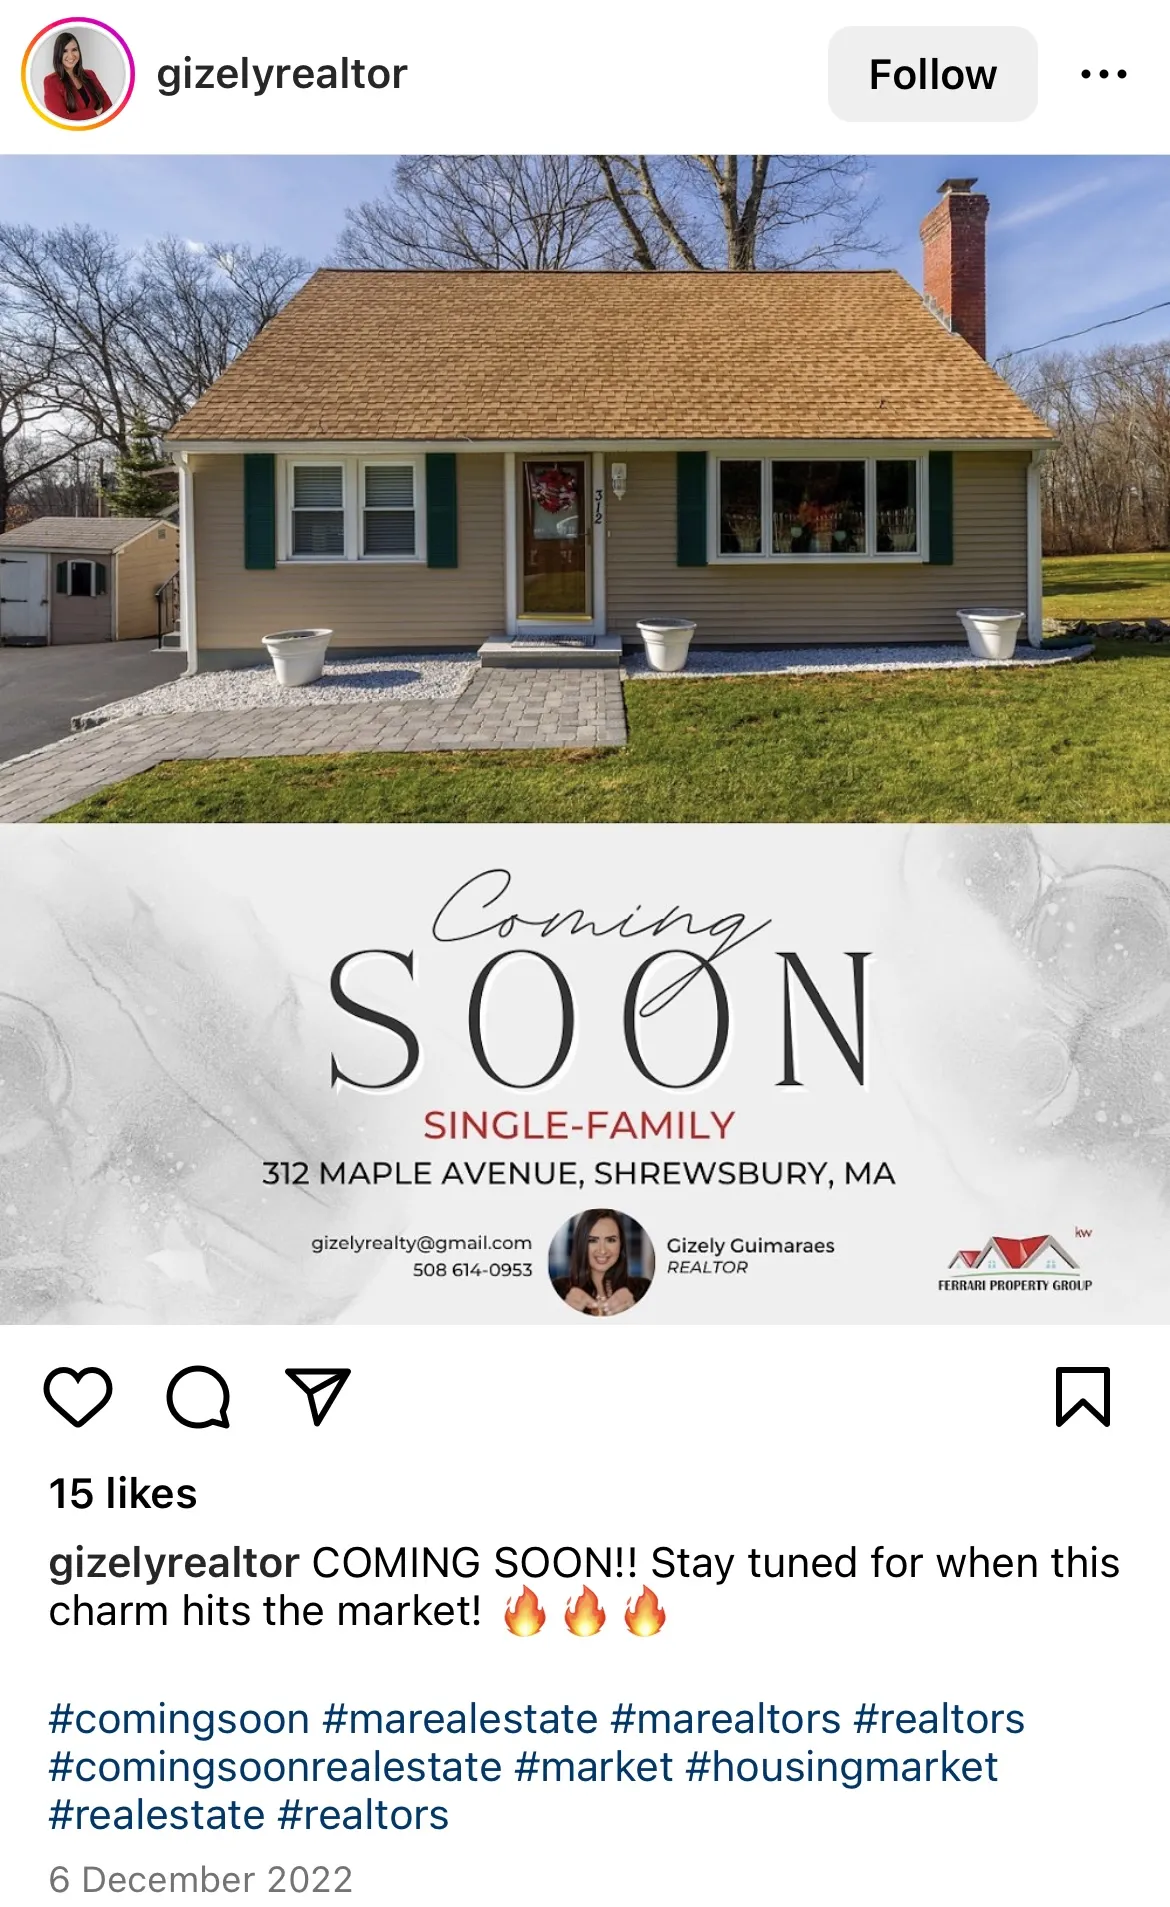 Using "coming soon" signs to generate real estate leads